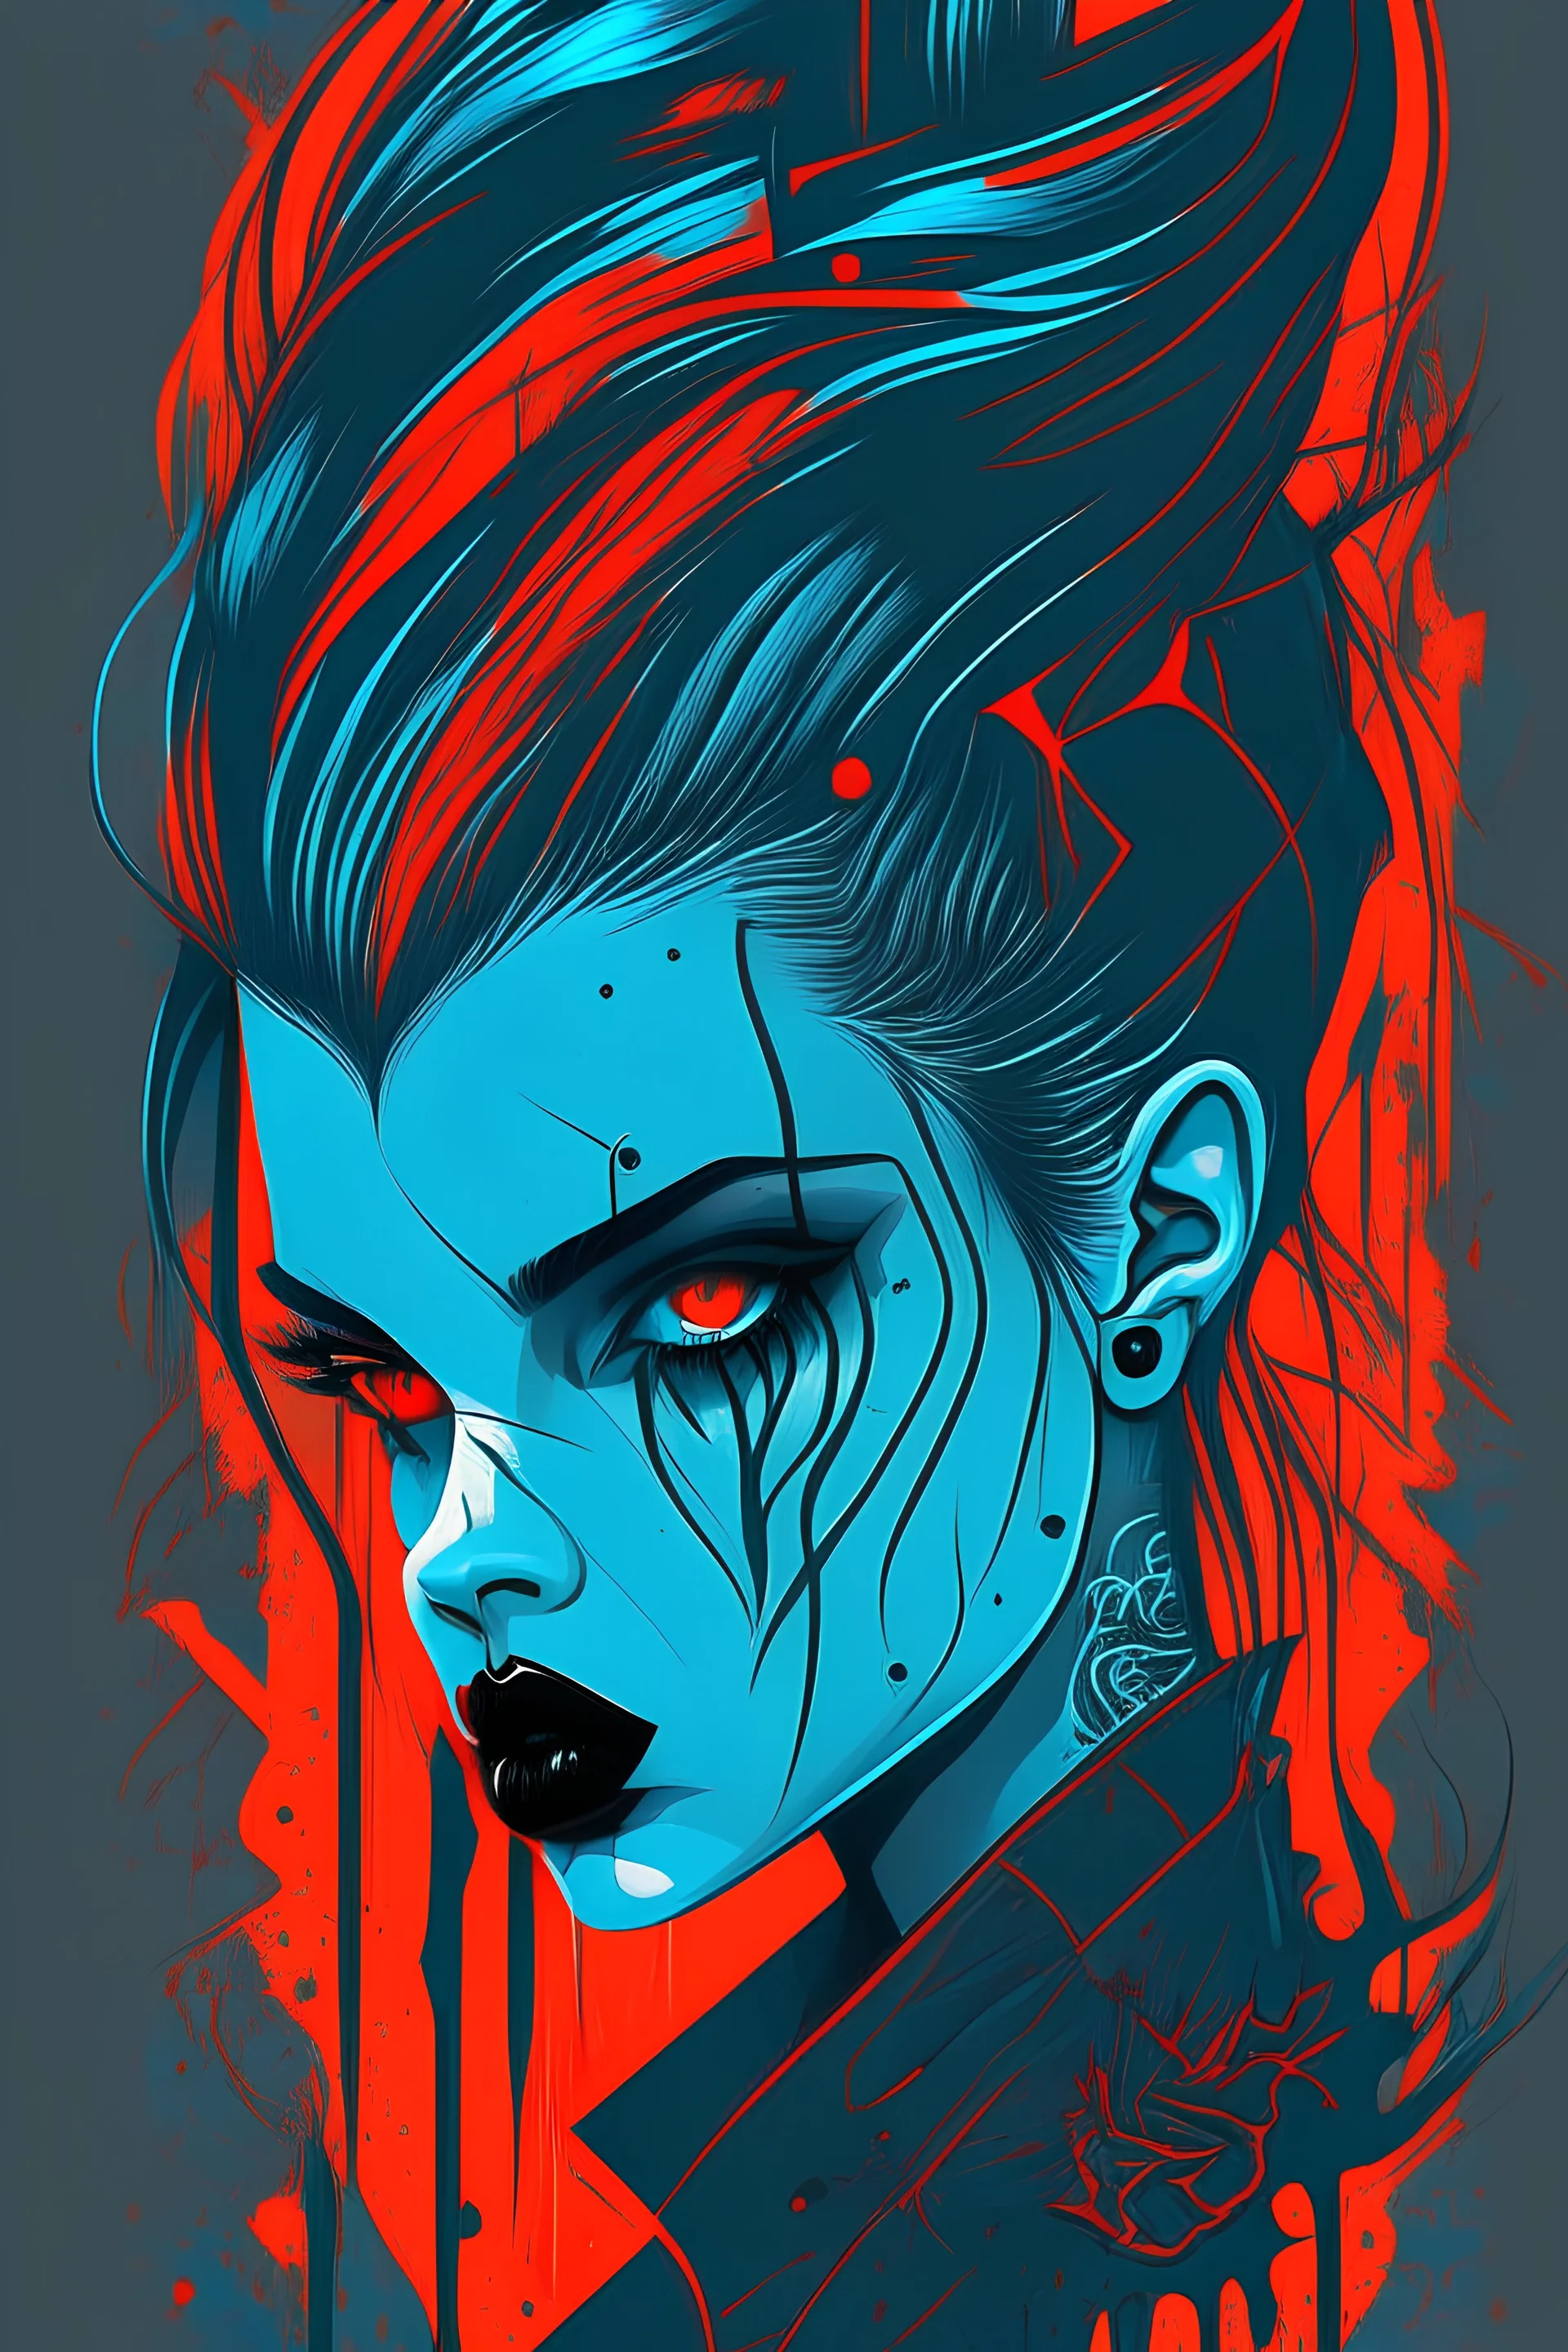 Create a wild, imaginative, goth punk vampire girl with highly detailed facial features, in the vector graphic style of Nirak1,Christopher Lee, and Cristiano Siqueira, utilizing simple shapes , vibrant colors,